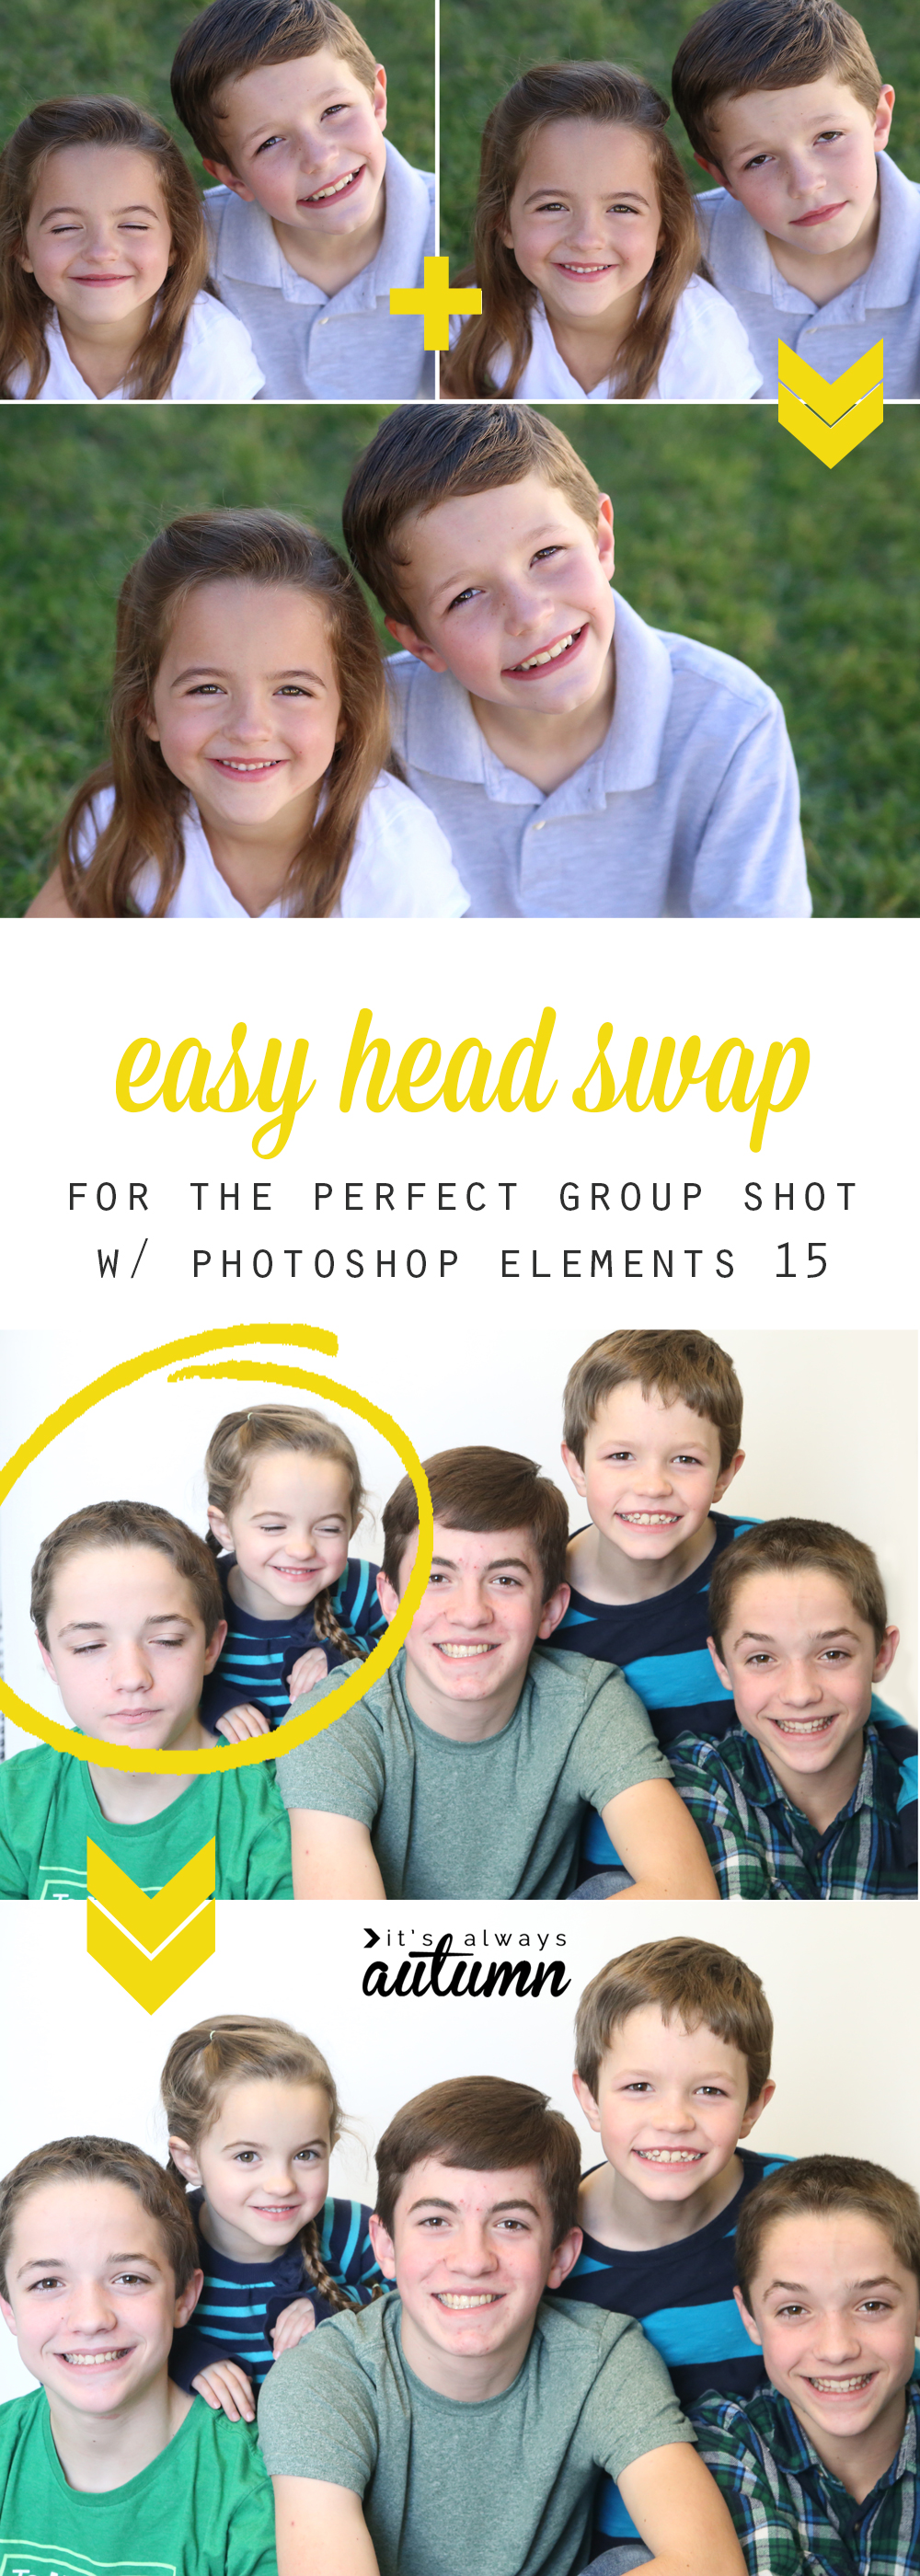 Photos showing head swap to get the best group picture of multiple children